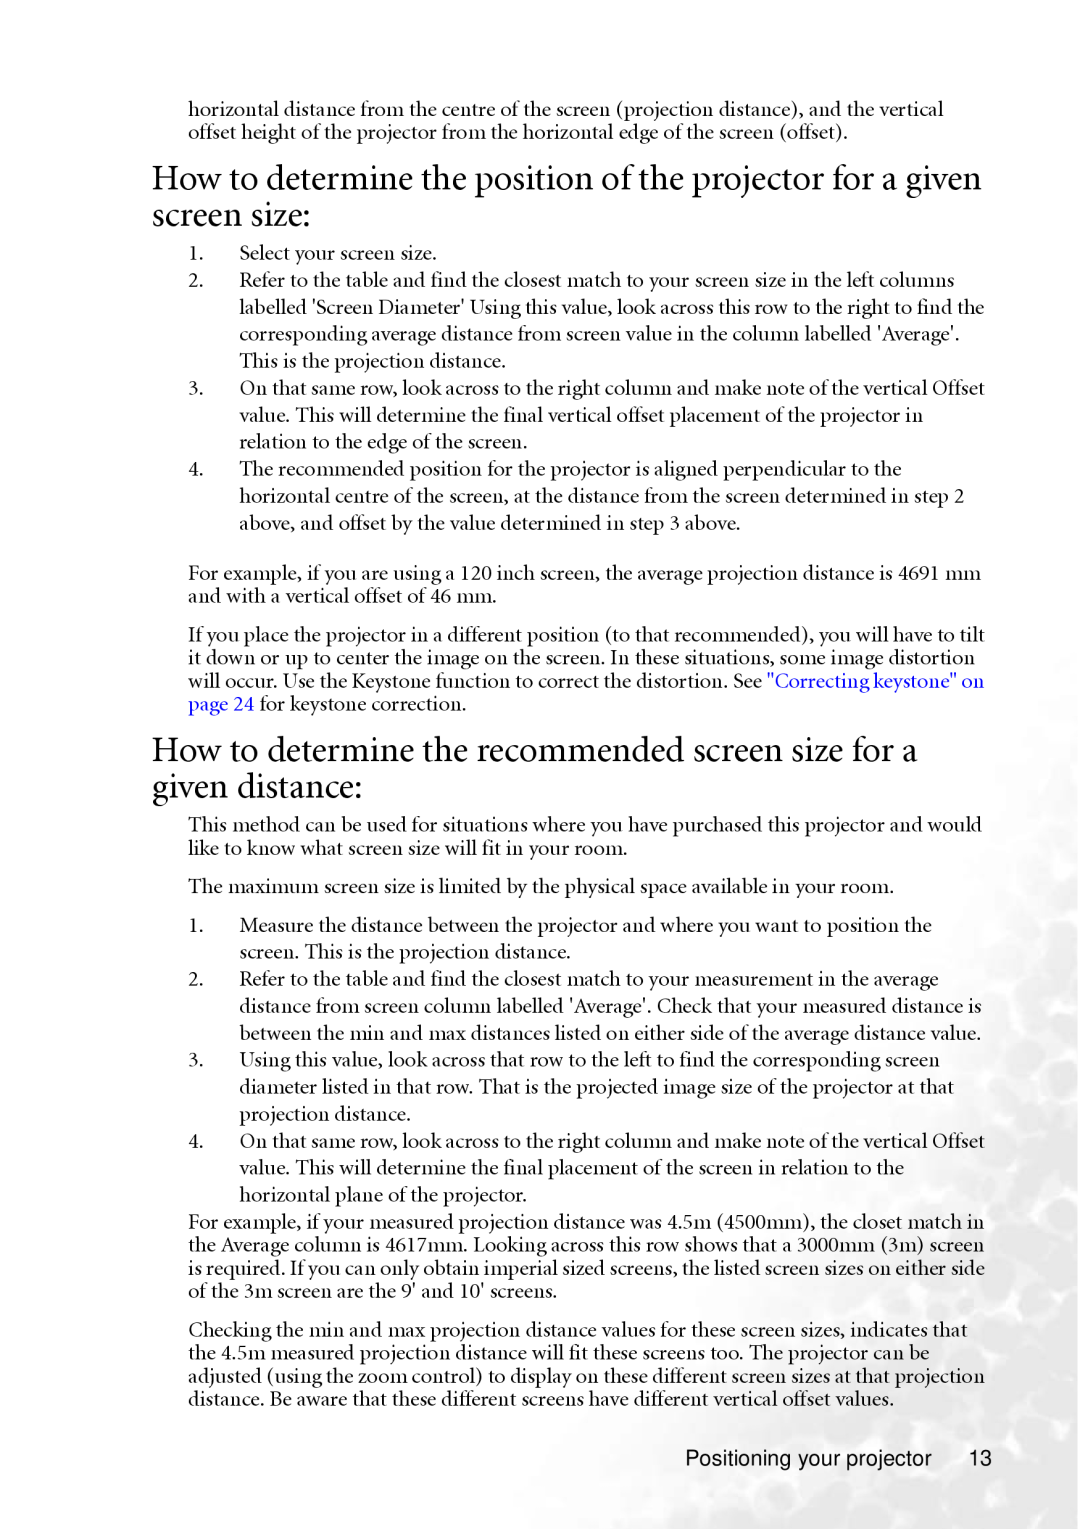 BenQ MP610 user manual How to determine the recommended screen size for a given distance 